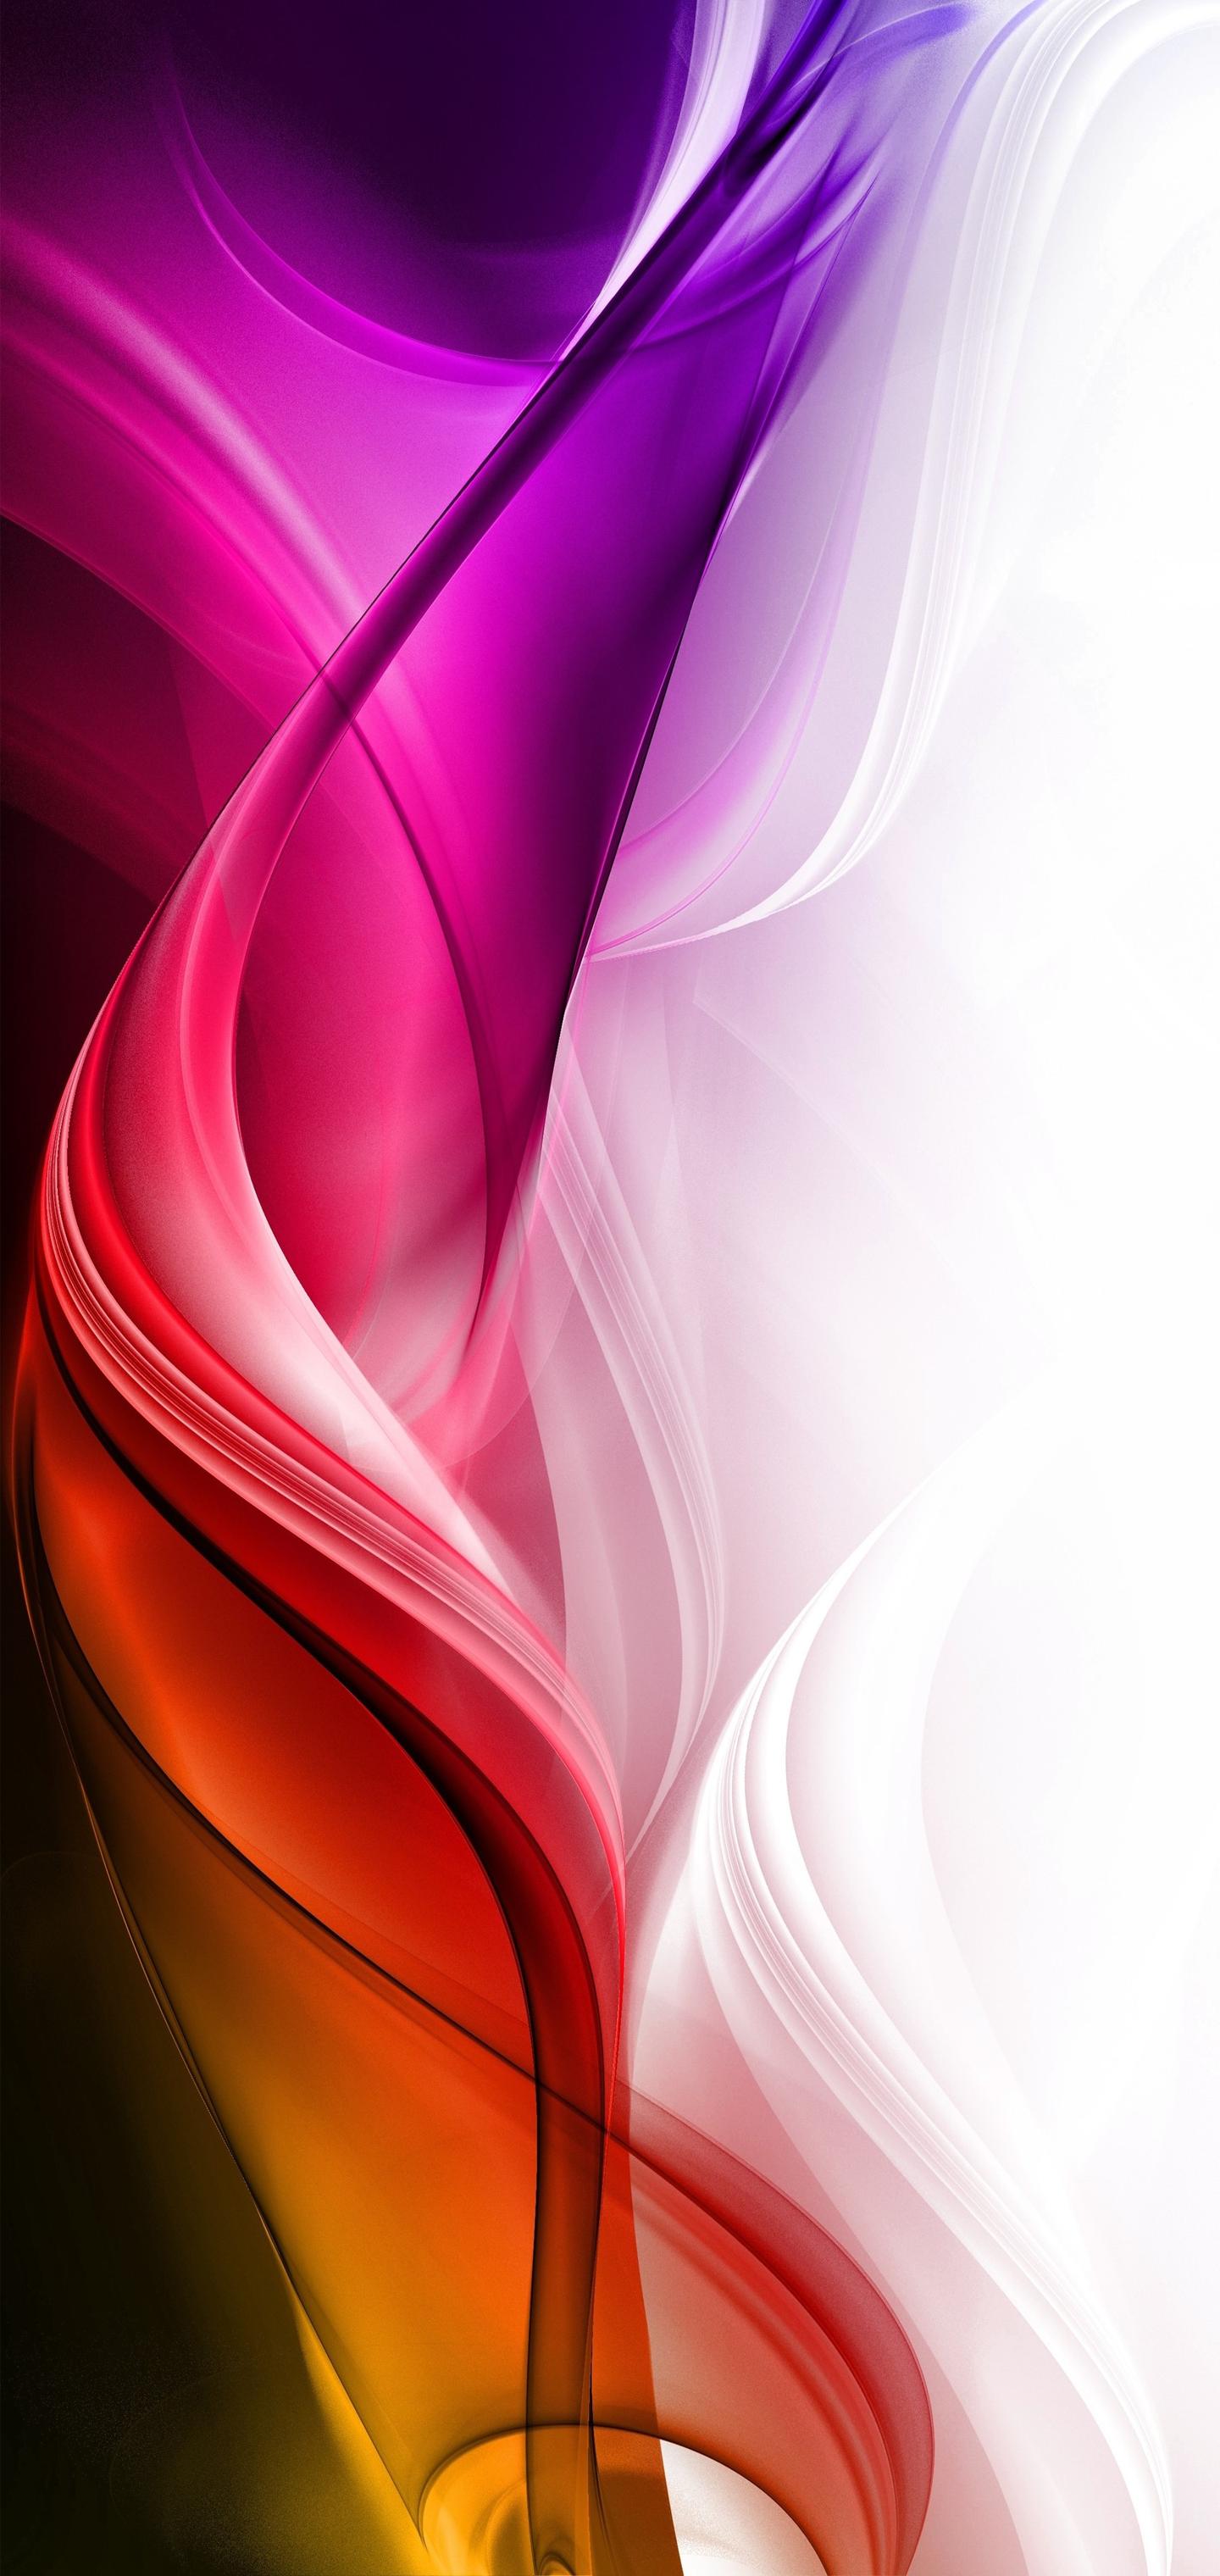 1440 x 3040 · png - The iPhone XS Max/Pro Max Wallpaper Thread - Page 35 - iPhone, iPad ...